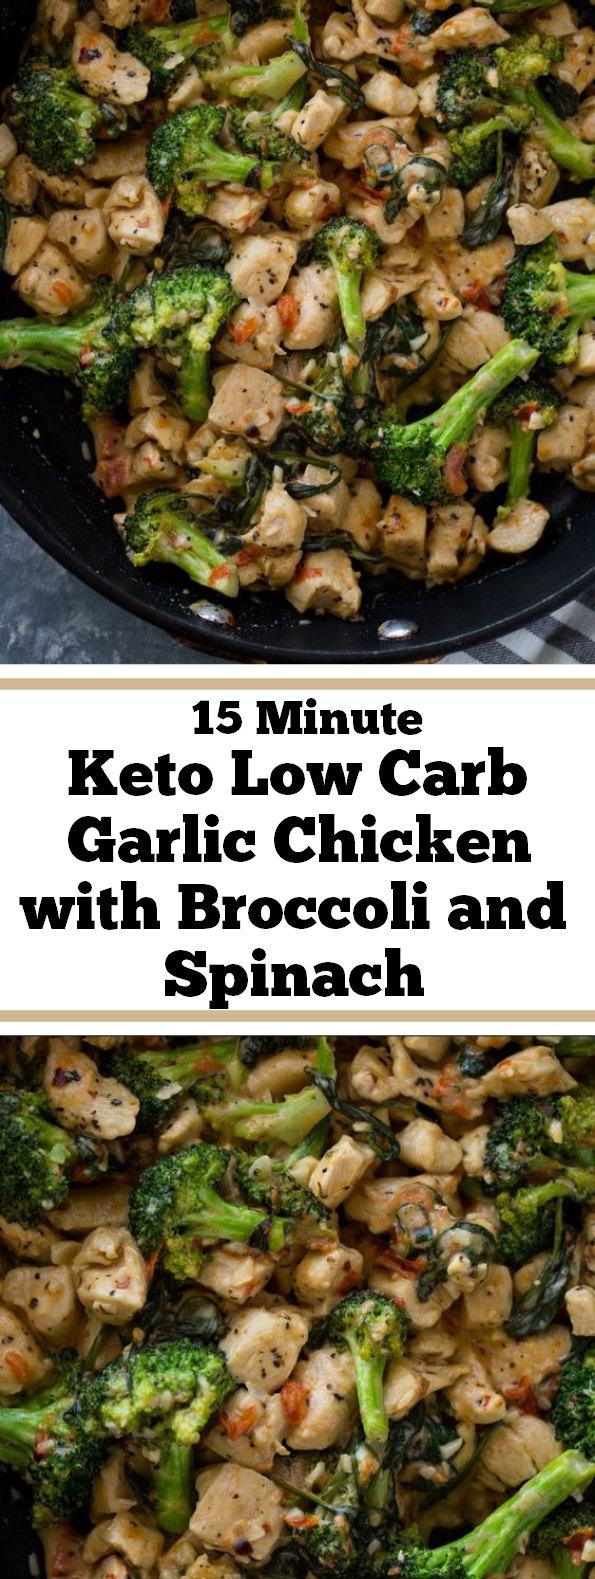 15 Minute Keto Low Carb Garlic Chicken with Broccoli and ...